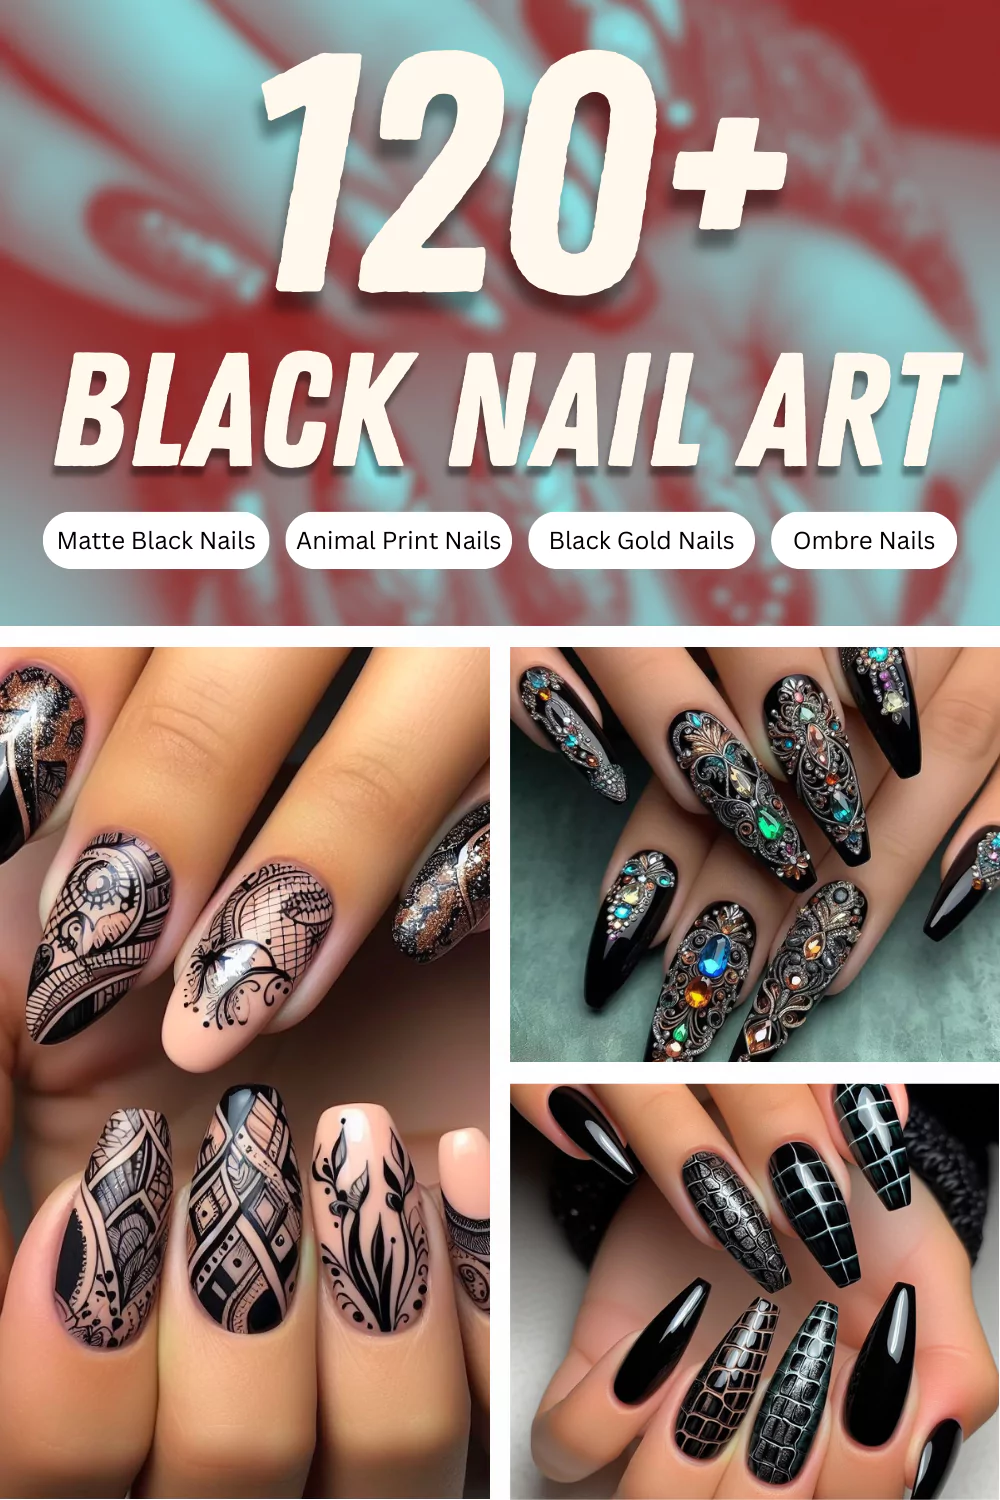 black and gold nails, black french tips, black silver nails, black and white nails, black ombre nails, black and red nails, black and nude nails, black and glitter nails, black lace nails, black and pastel naisl, black and metallic nails, black and neon nails, black and marble nails, black and floral nails, black and geometric nails, black and animal print nails, black and metallic foil nails, black and holographic nails, black and gemstone nails,